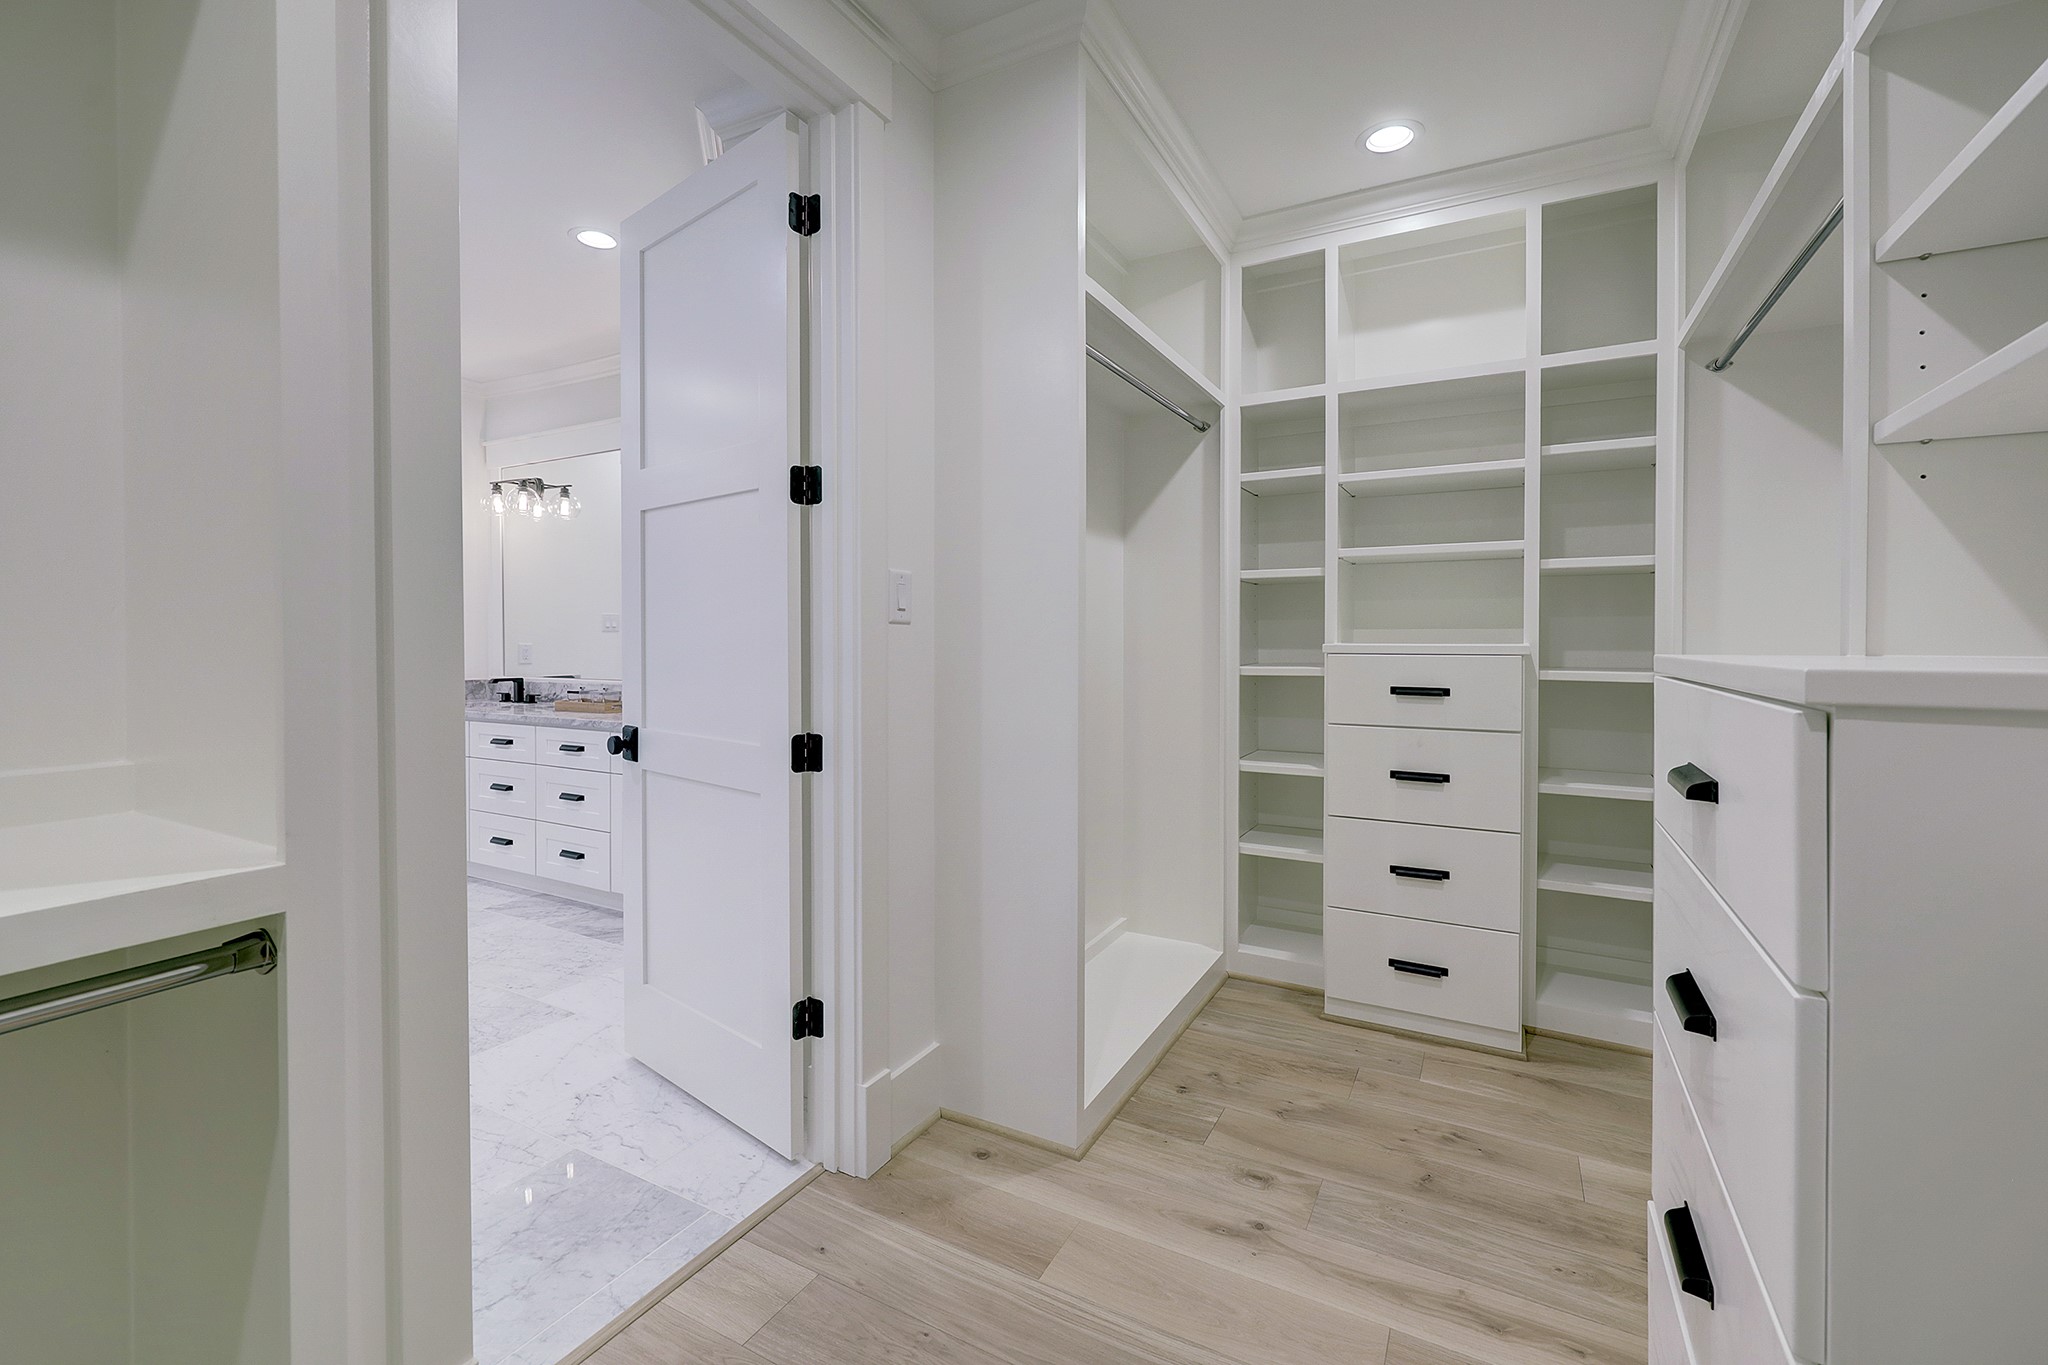 These built-ins in the primary closet are the apex of organization!